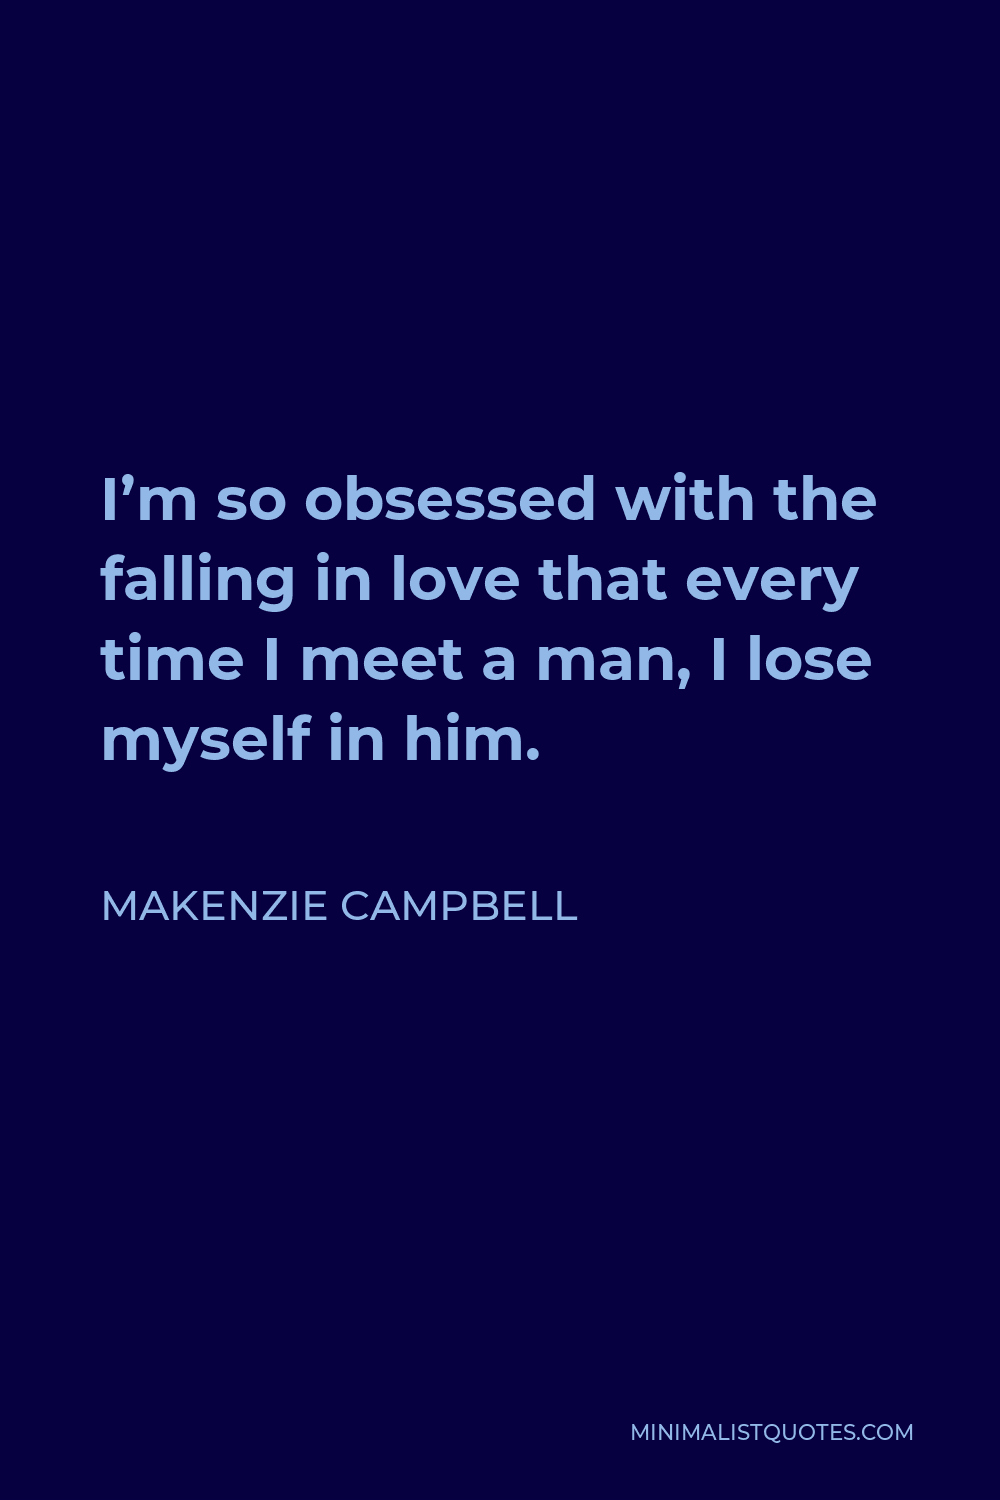 Makenzie Campbell Quote - I’m so obsessed with the falling in love that every time I meet a man, I lose myself in him.